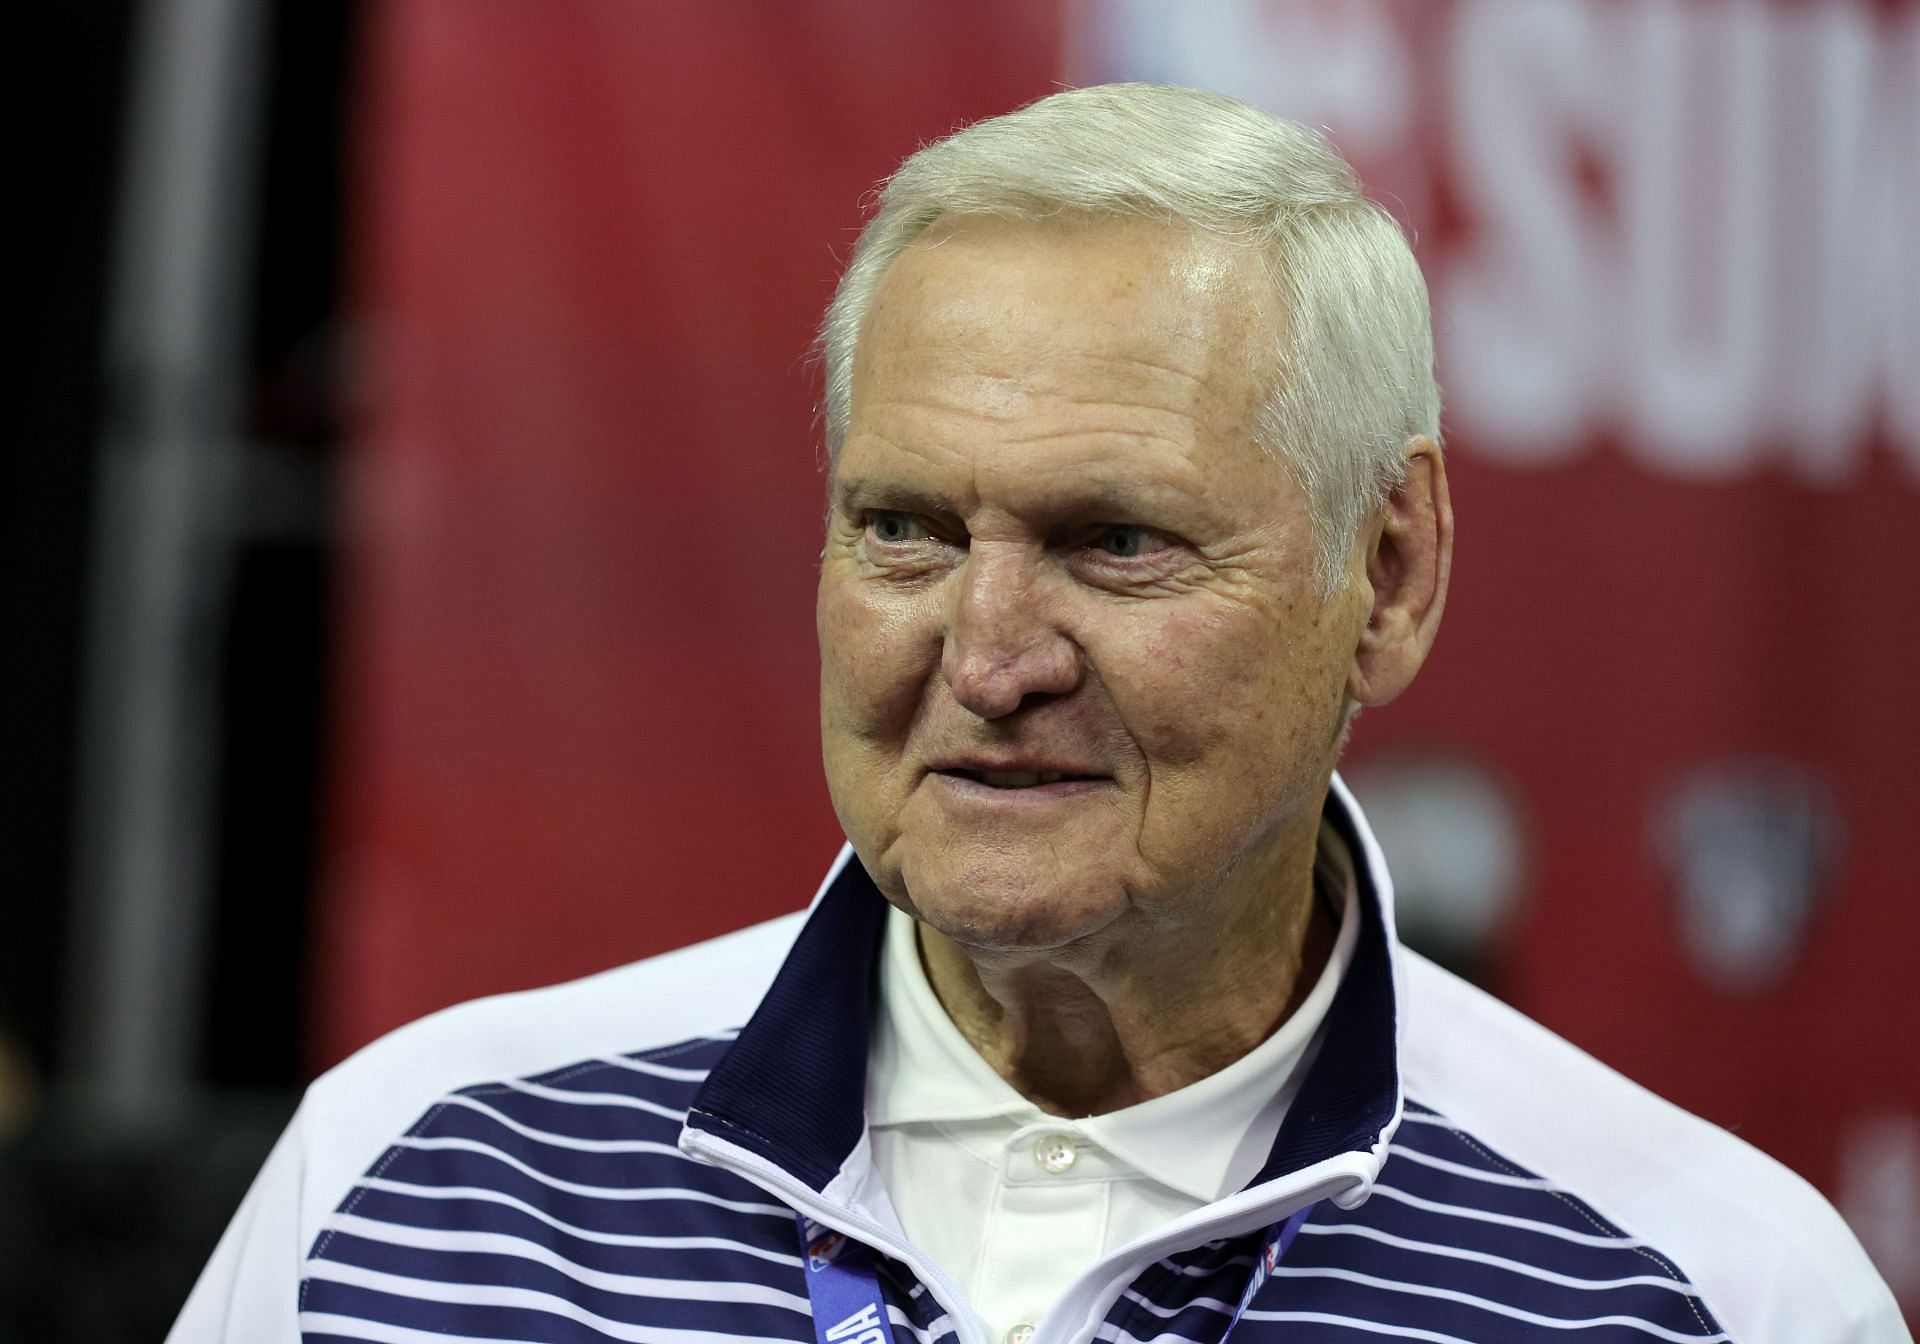 College basketball and NBA legend Jerry West is the namesake for an award given to top collegiate shooting guards.